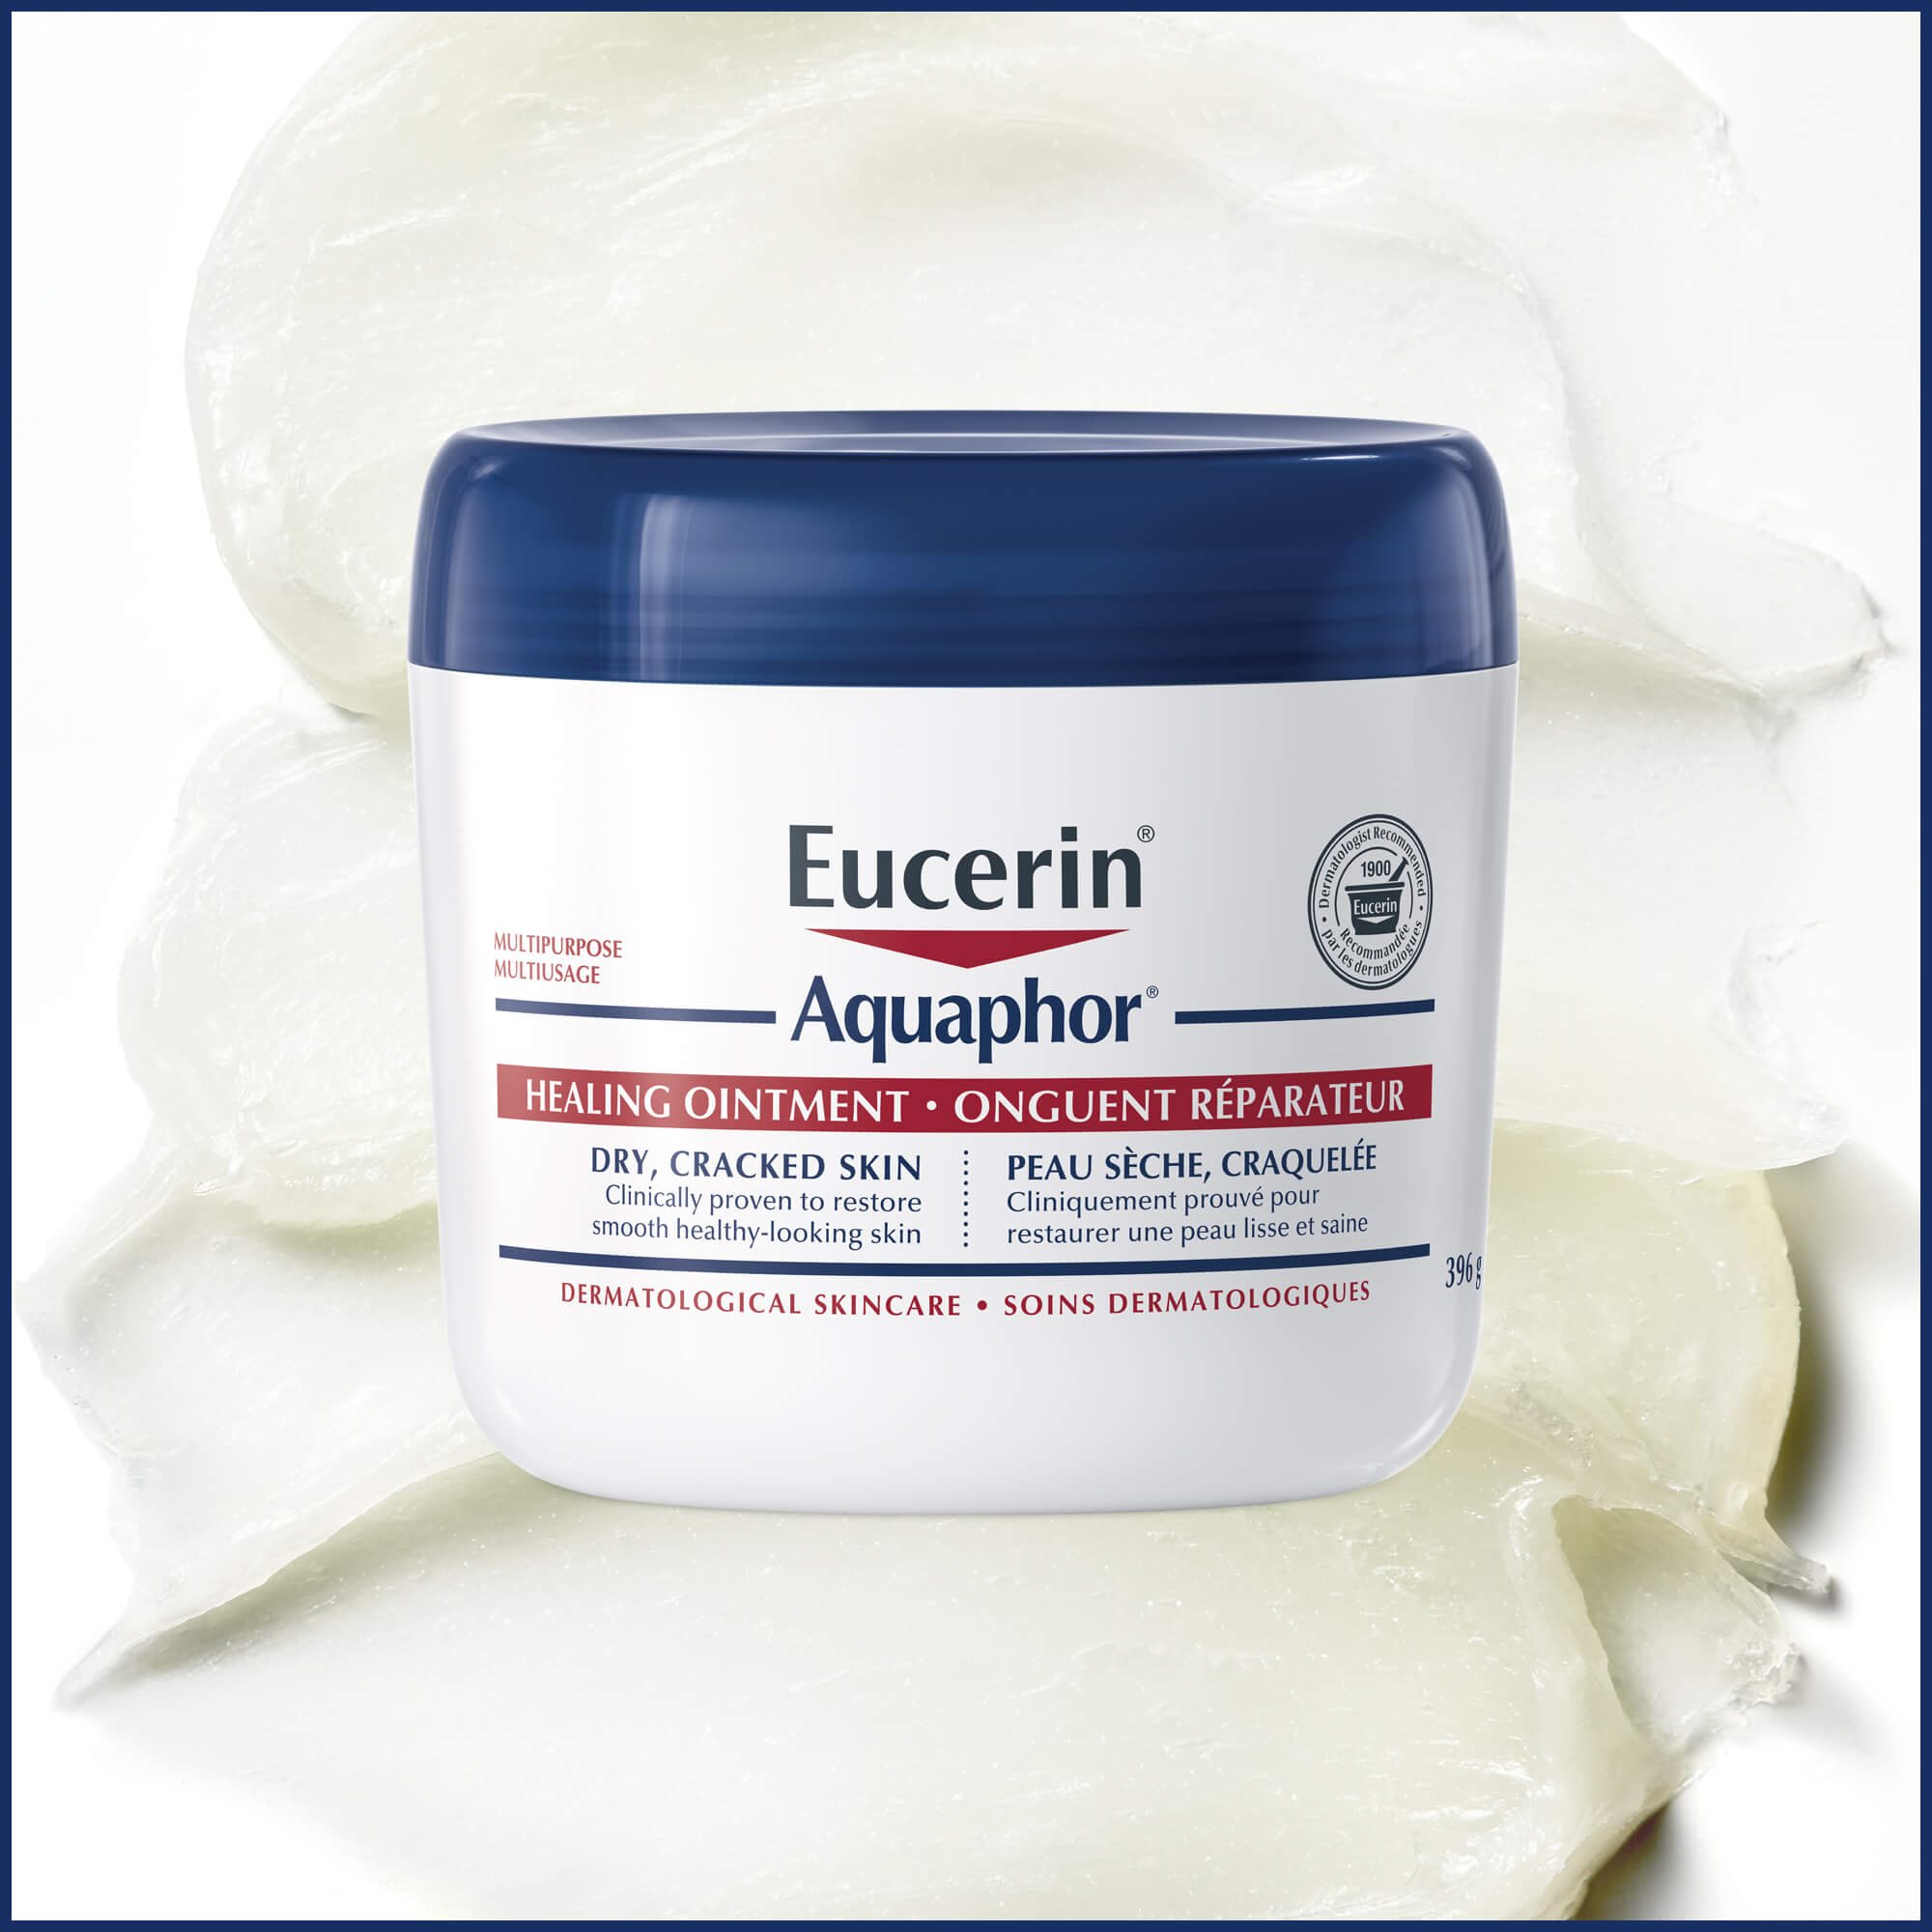 396g tub of Eucerin Aquaphor overlaid upon an image of the ointment texture